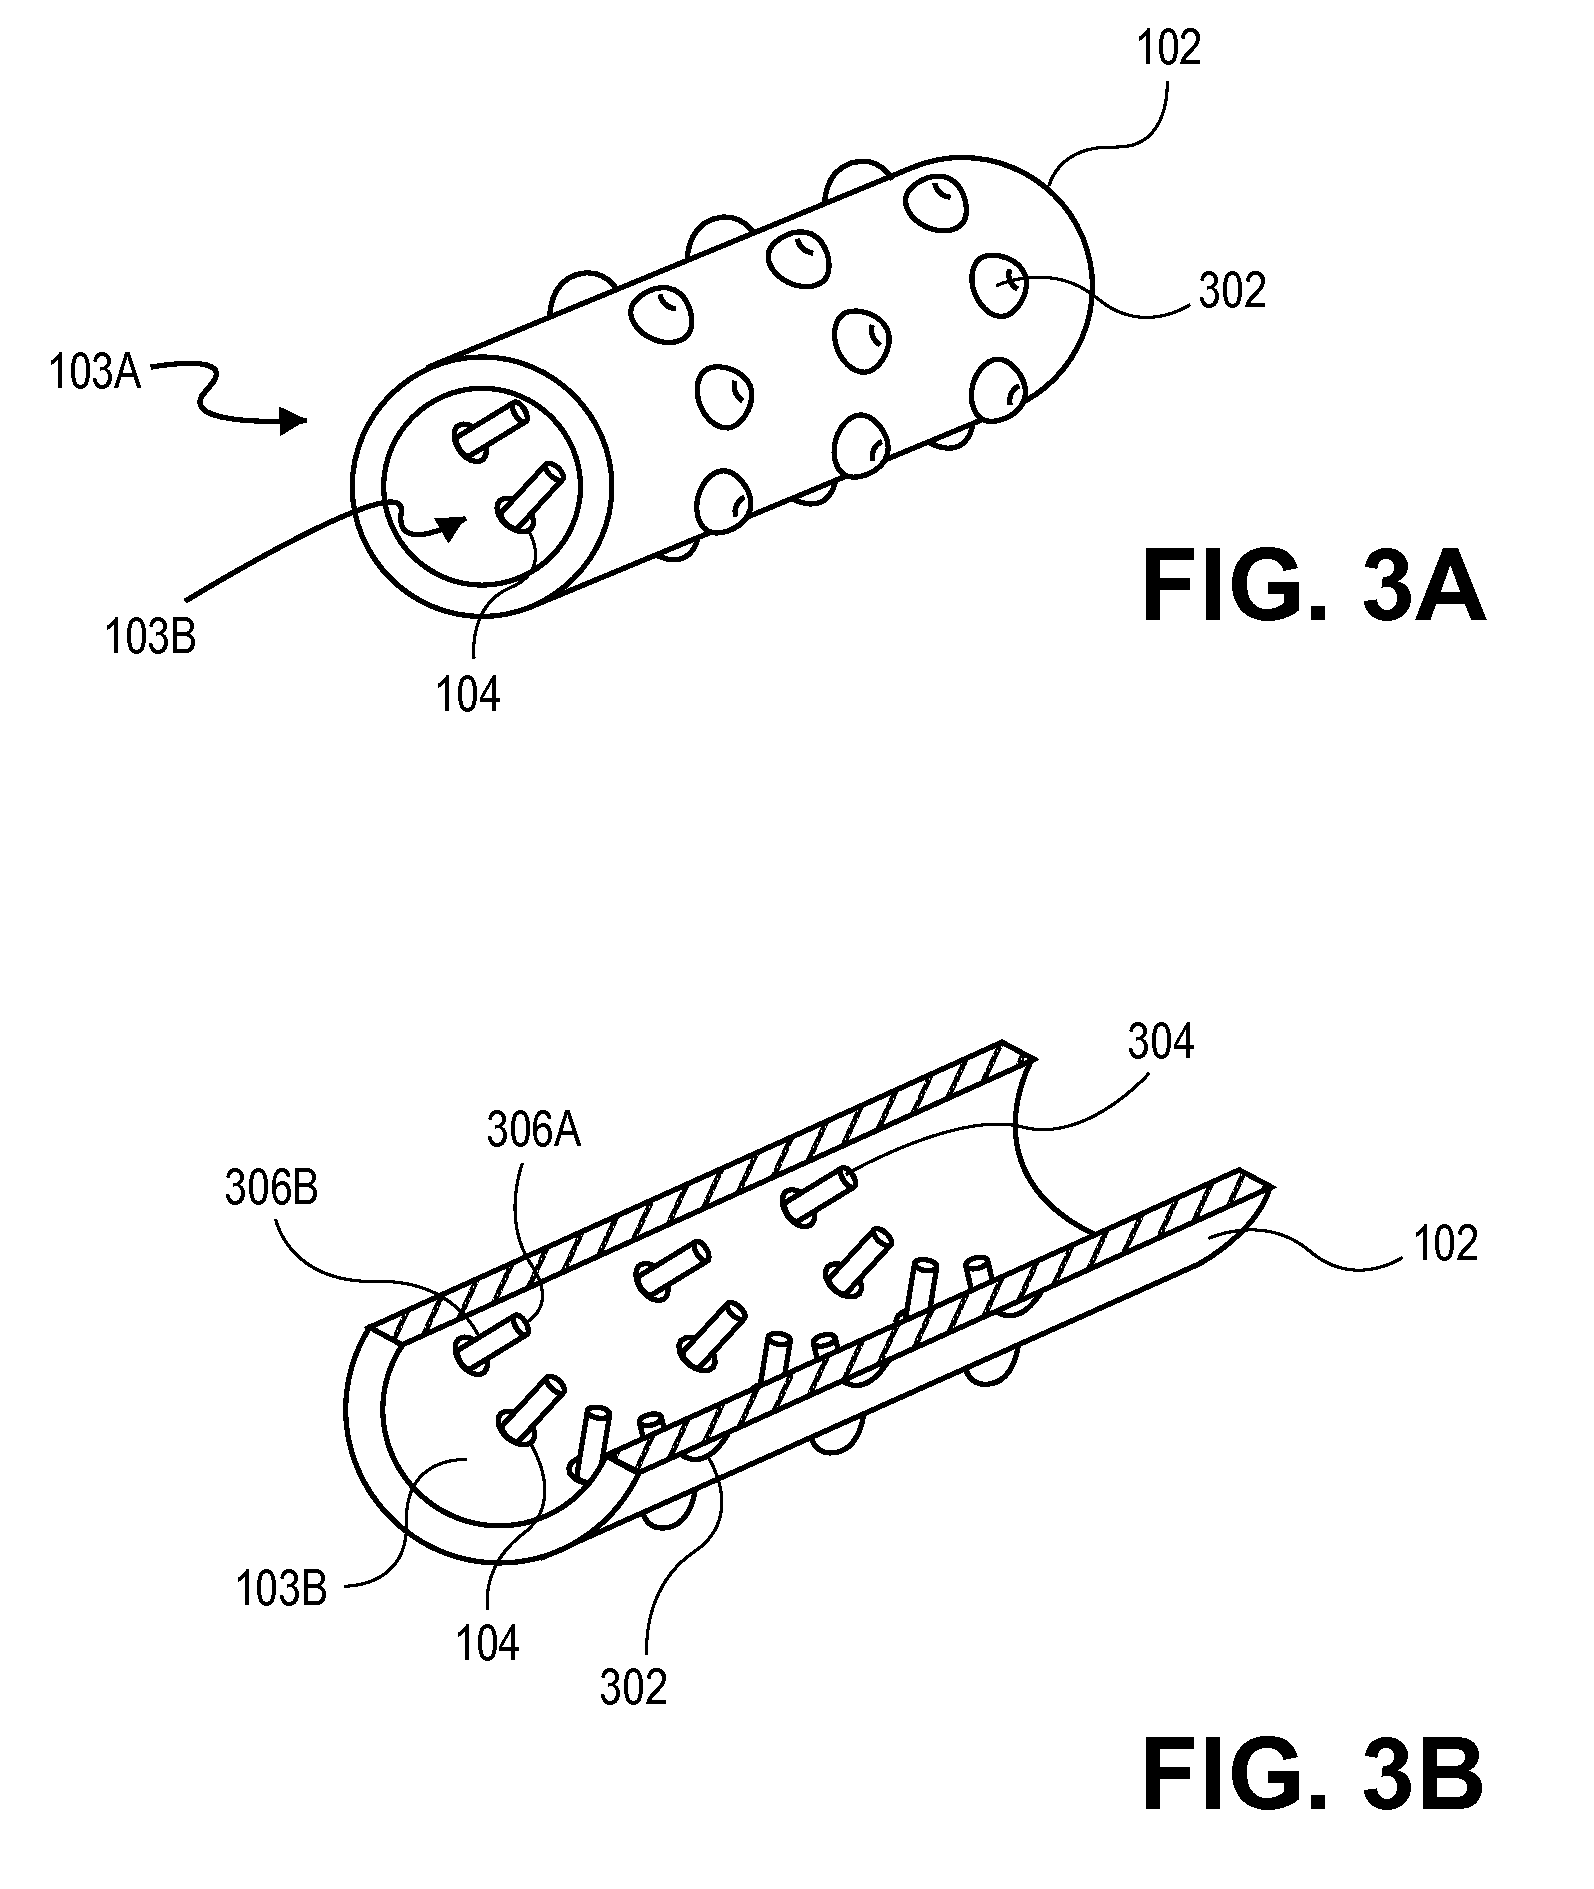 Bone Repositioning Apparatus and System